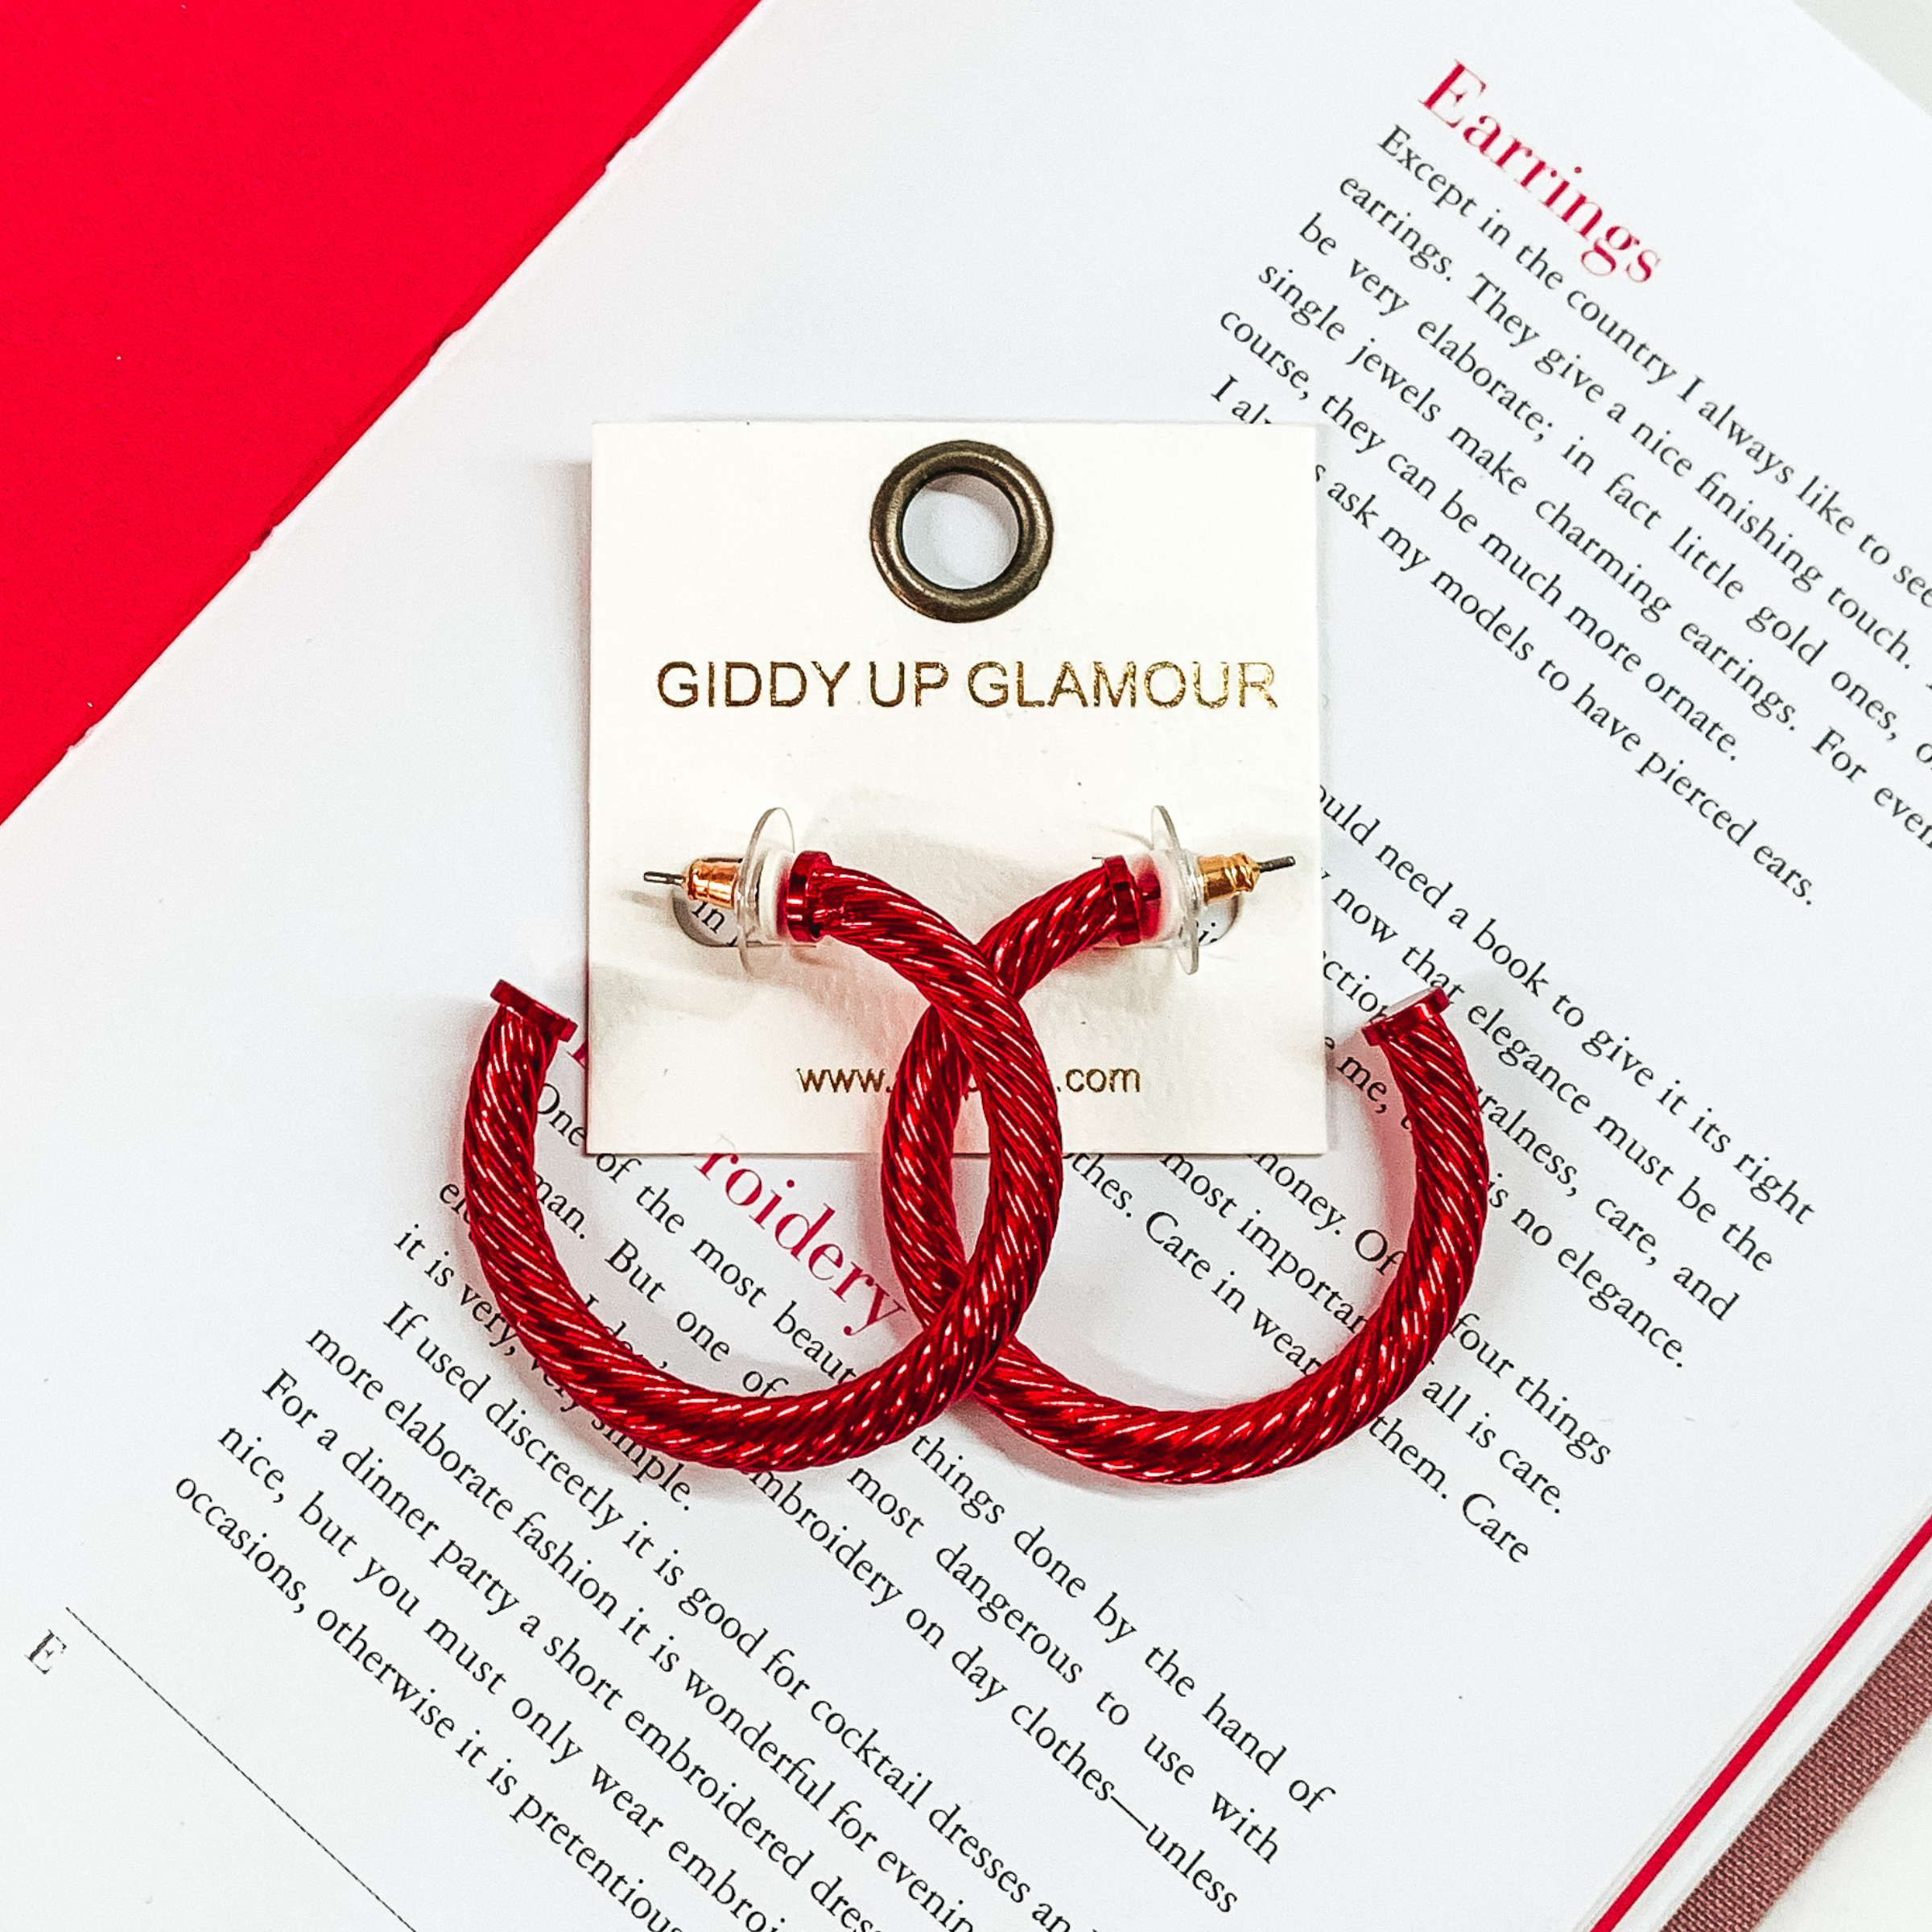 Mettalic red cable hoop earrings pictured on an open book on a white background. 